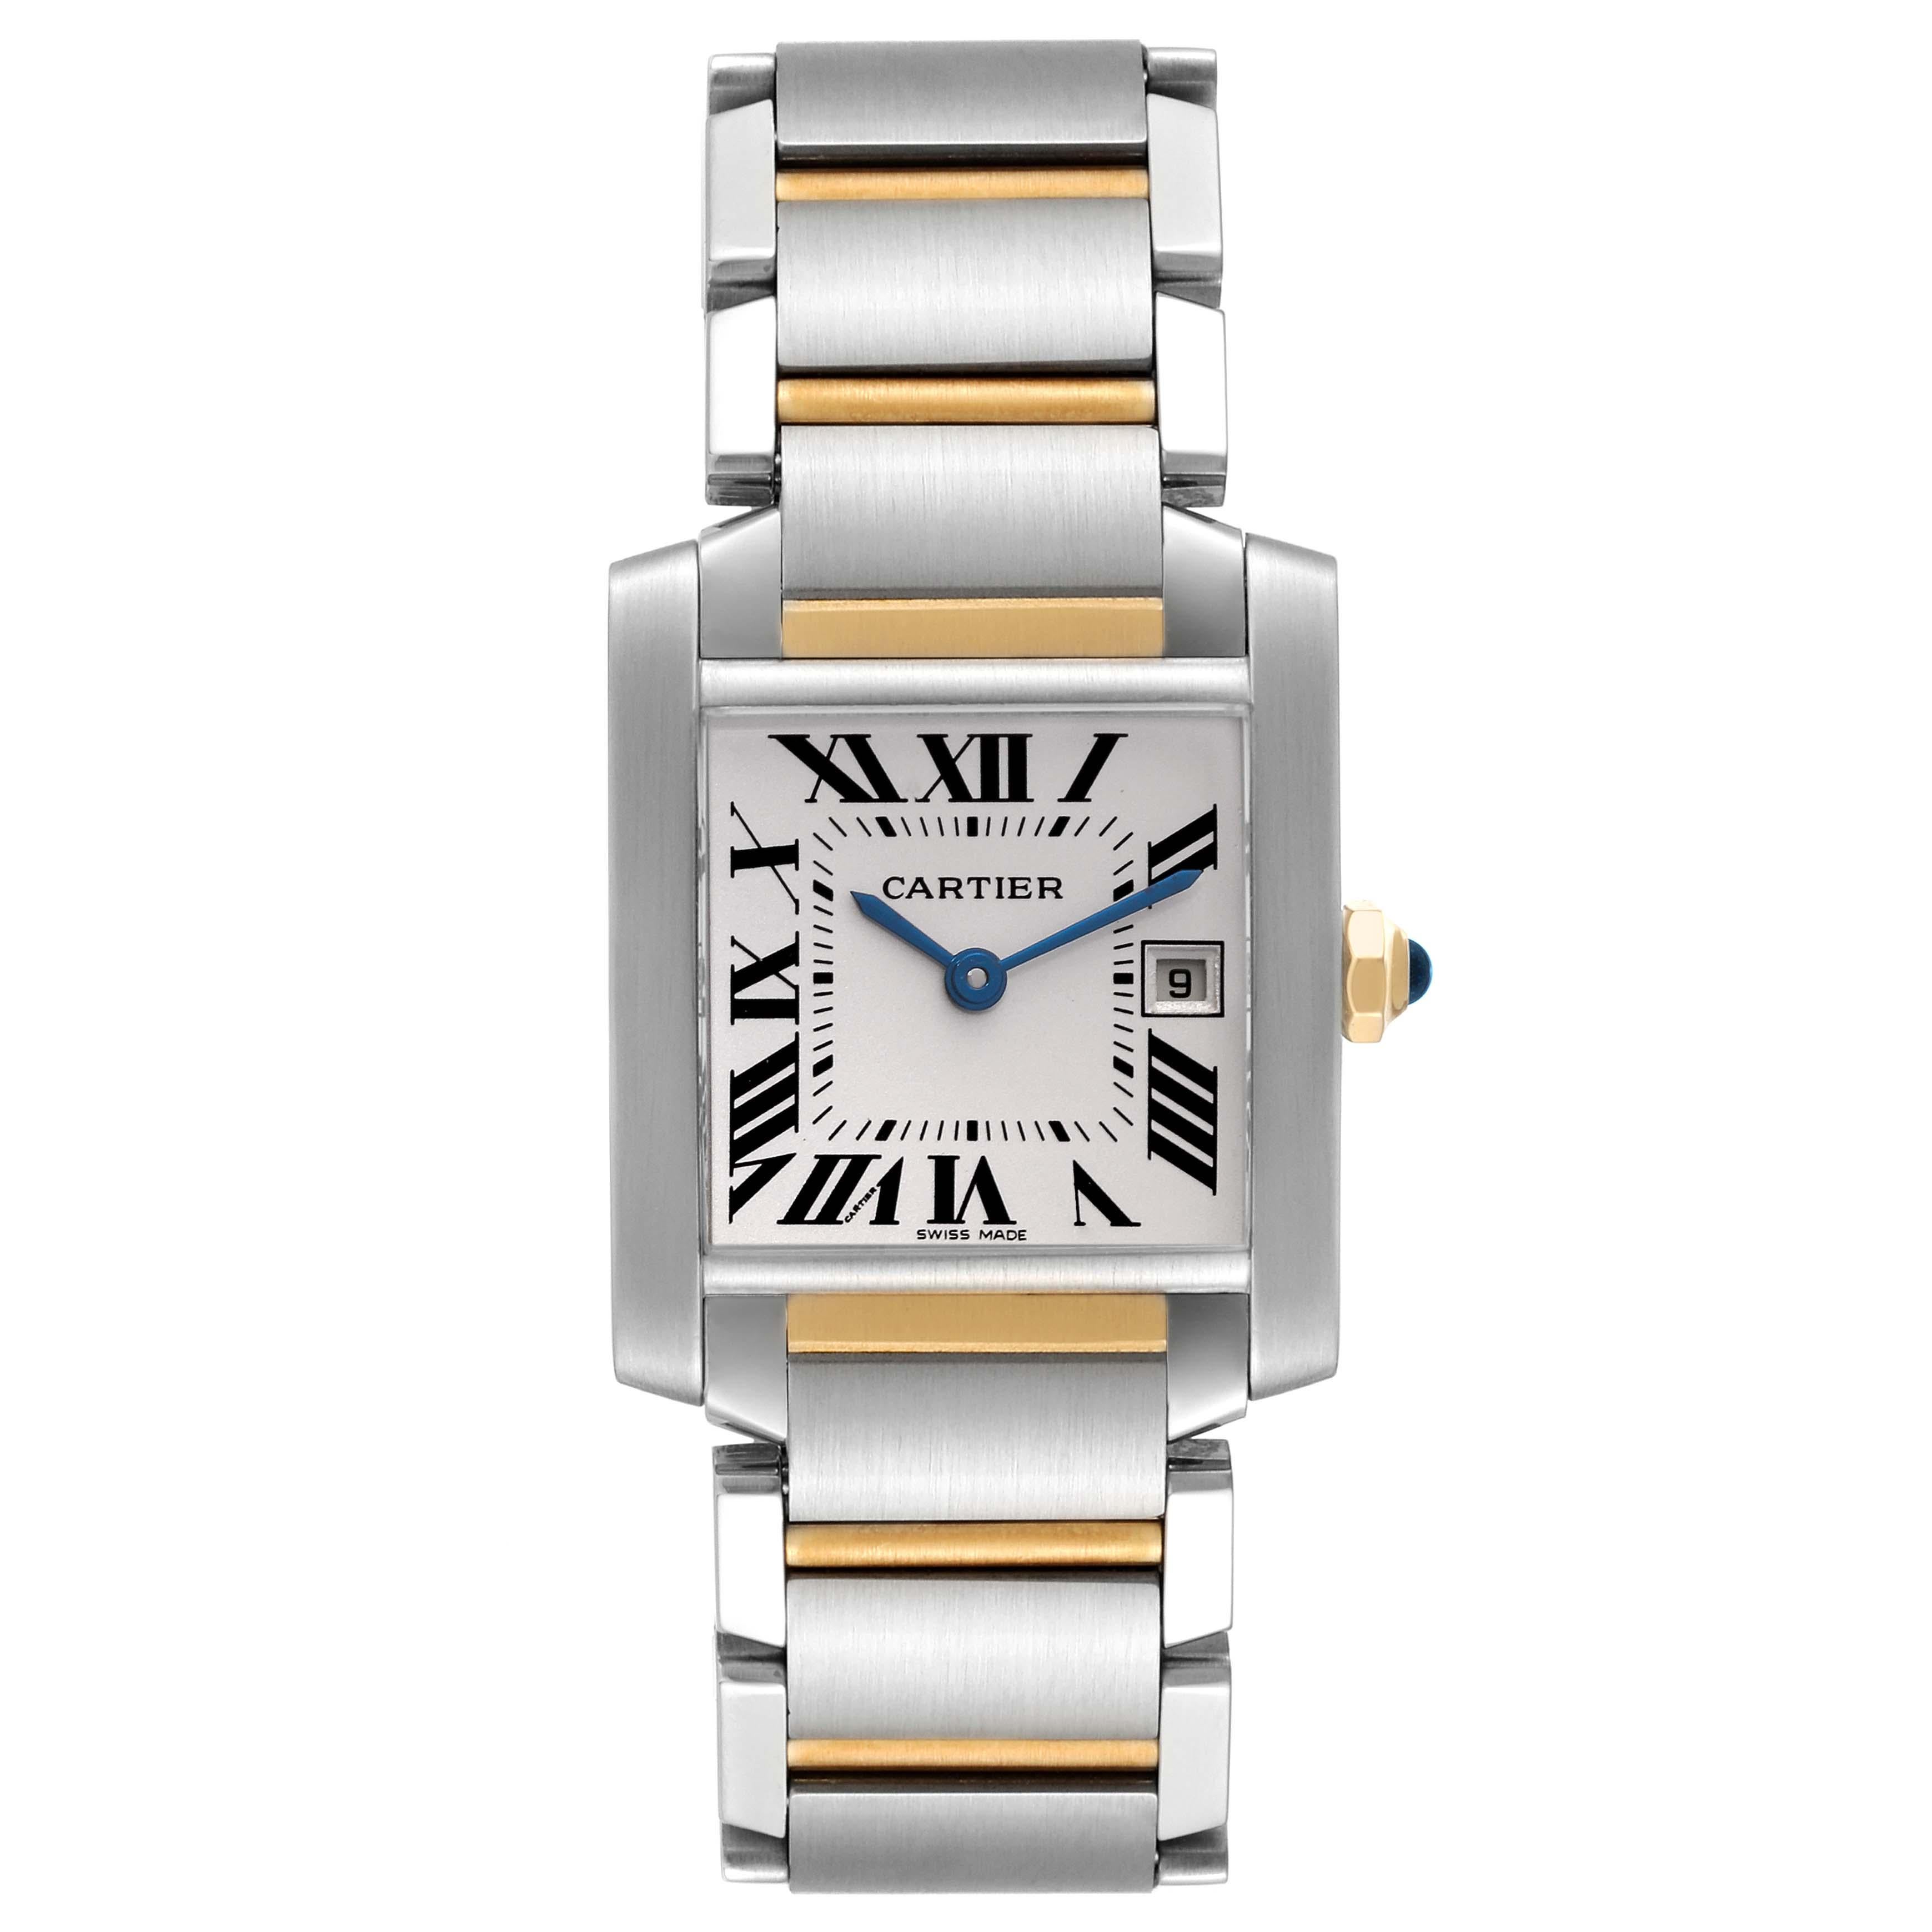 Cartier Tank Francaise Midsize Steel Yellow Gold Ladies Watch W51012Q4. Quartz movement. Rectangular stainless steel 25.0 x 30.0 mm case. Octagonal 18k yellow gold crown set with a blue cabochon. . Scratch resistant sapphire crystal. Silver grained